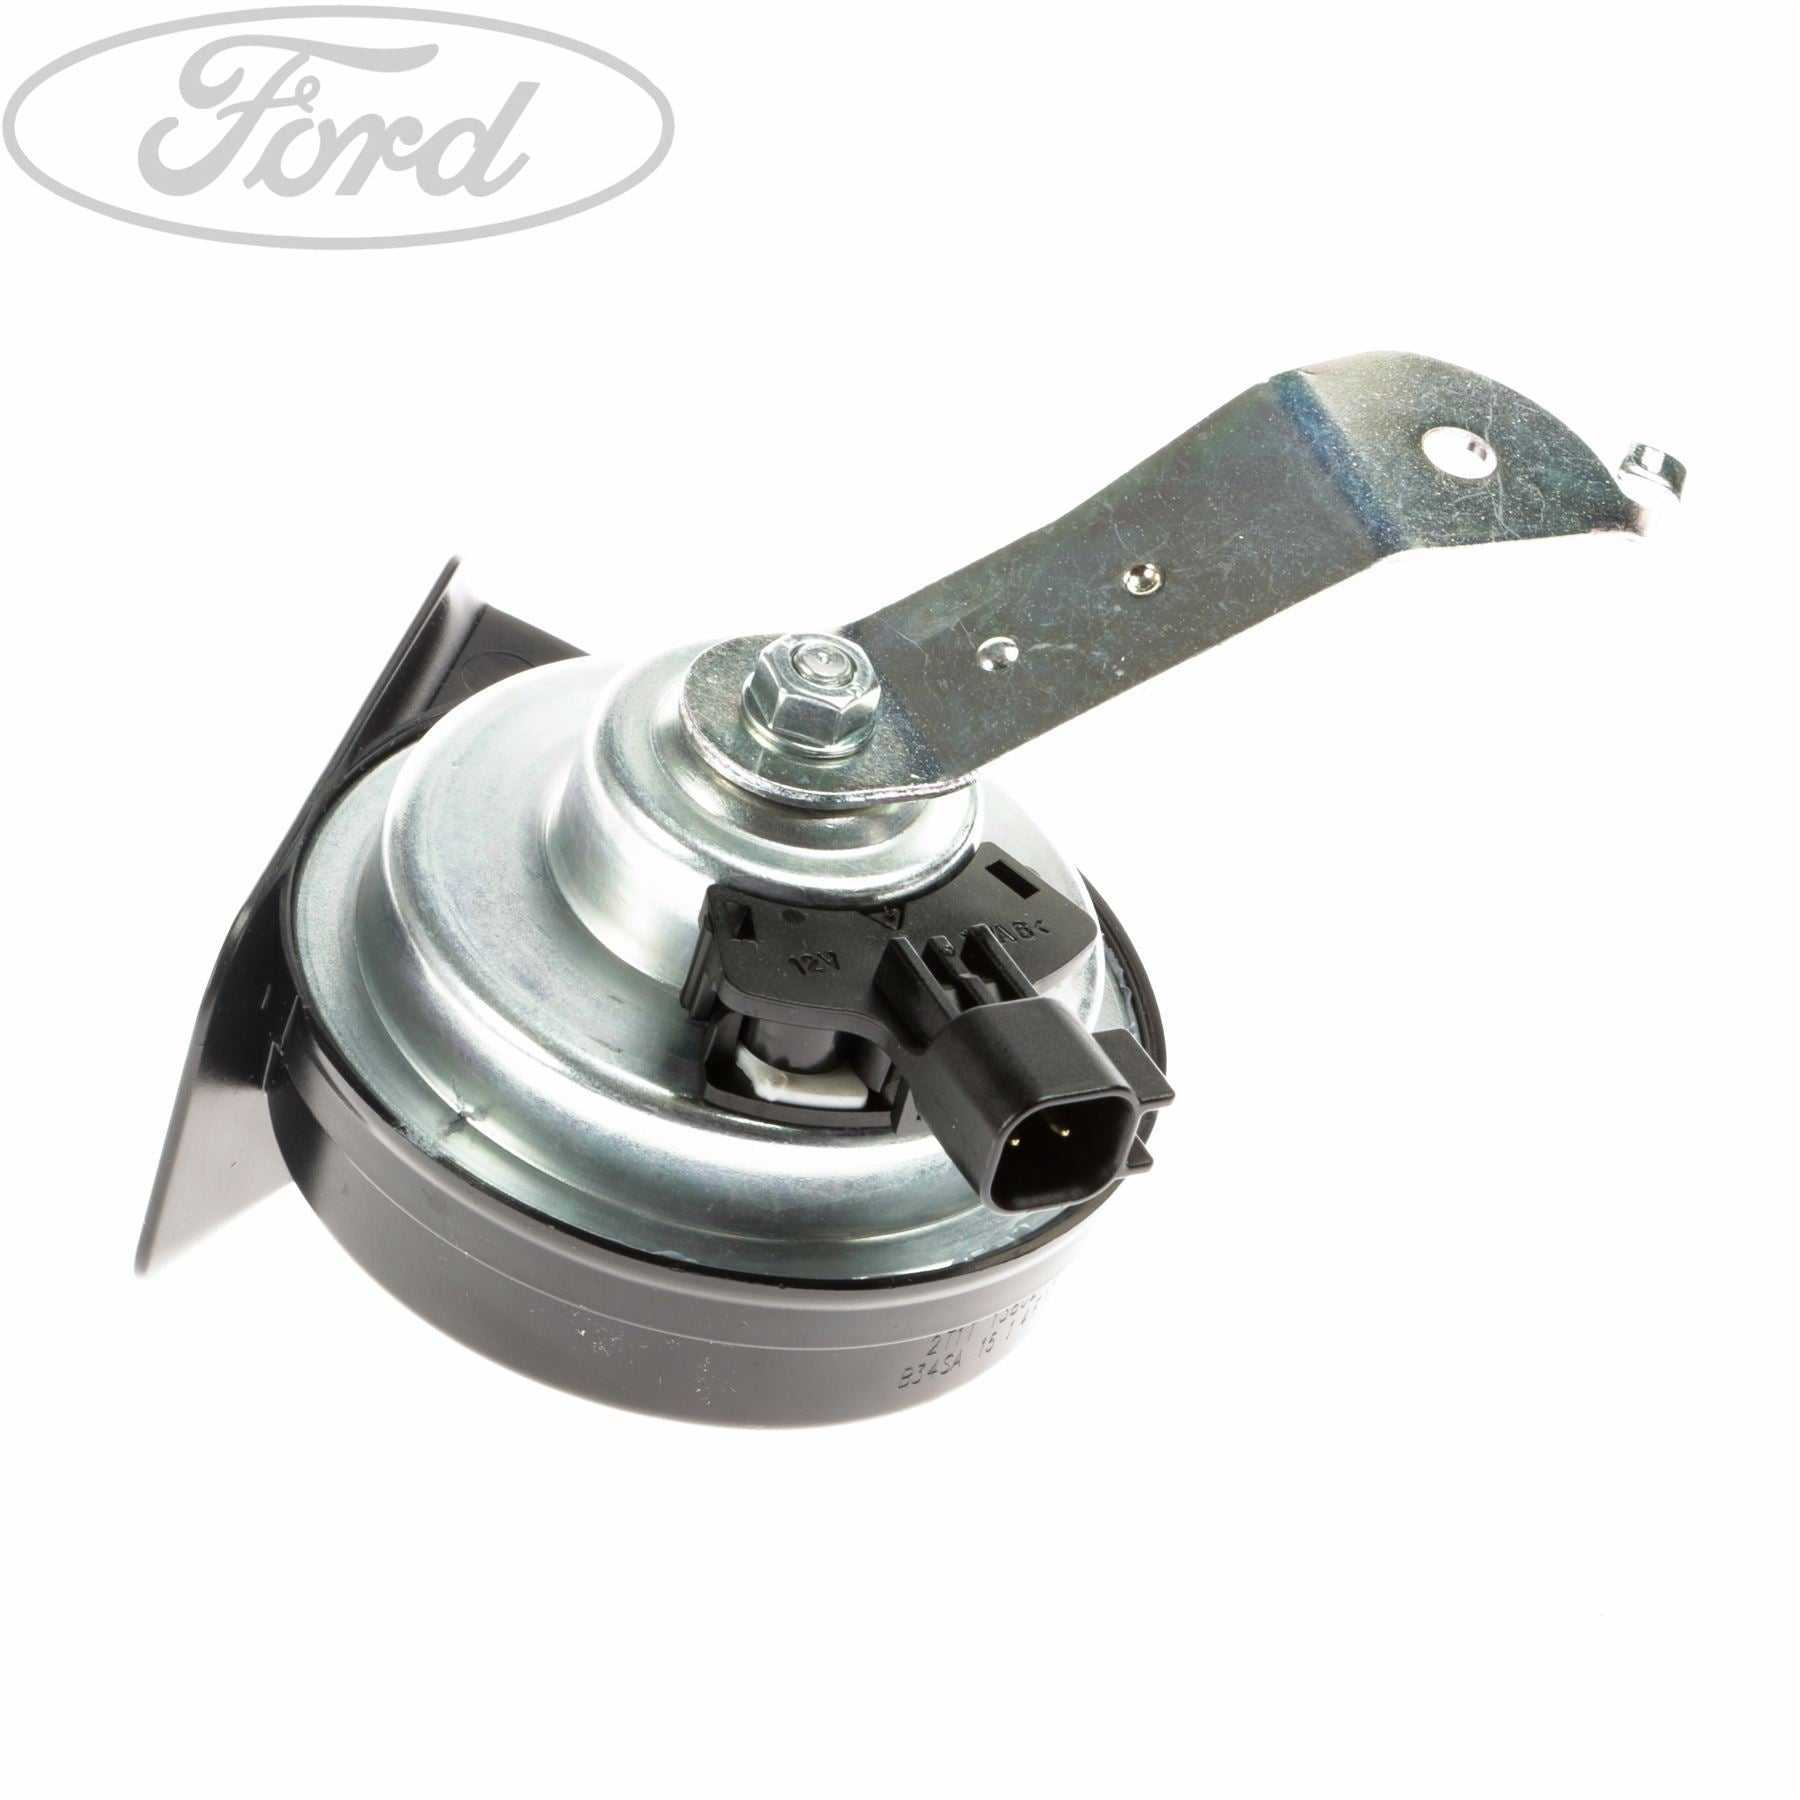 Ford, TRANSIT CONNECT LOW PITCH CAR HORN